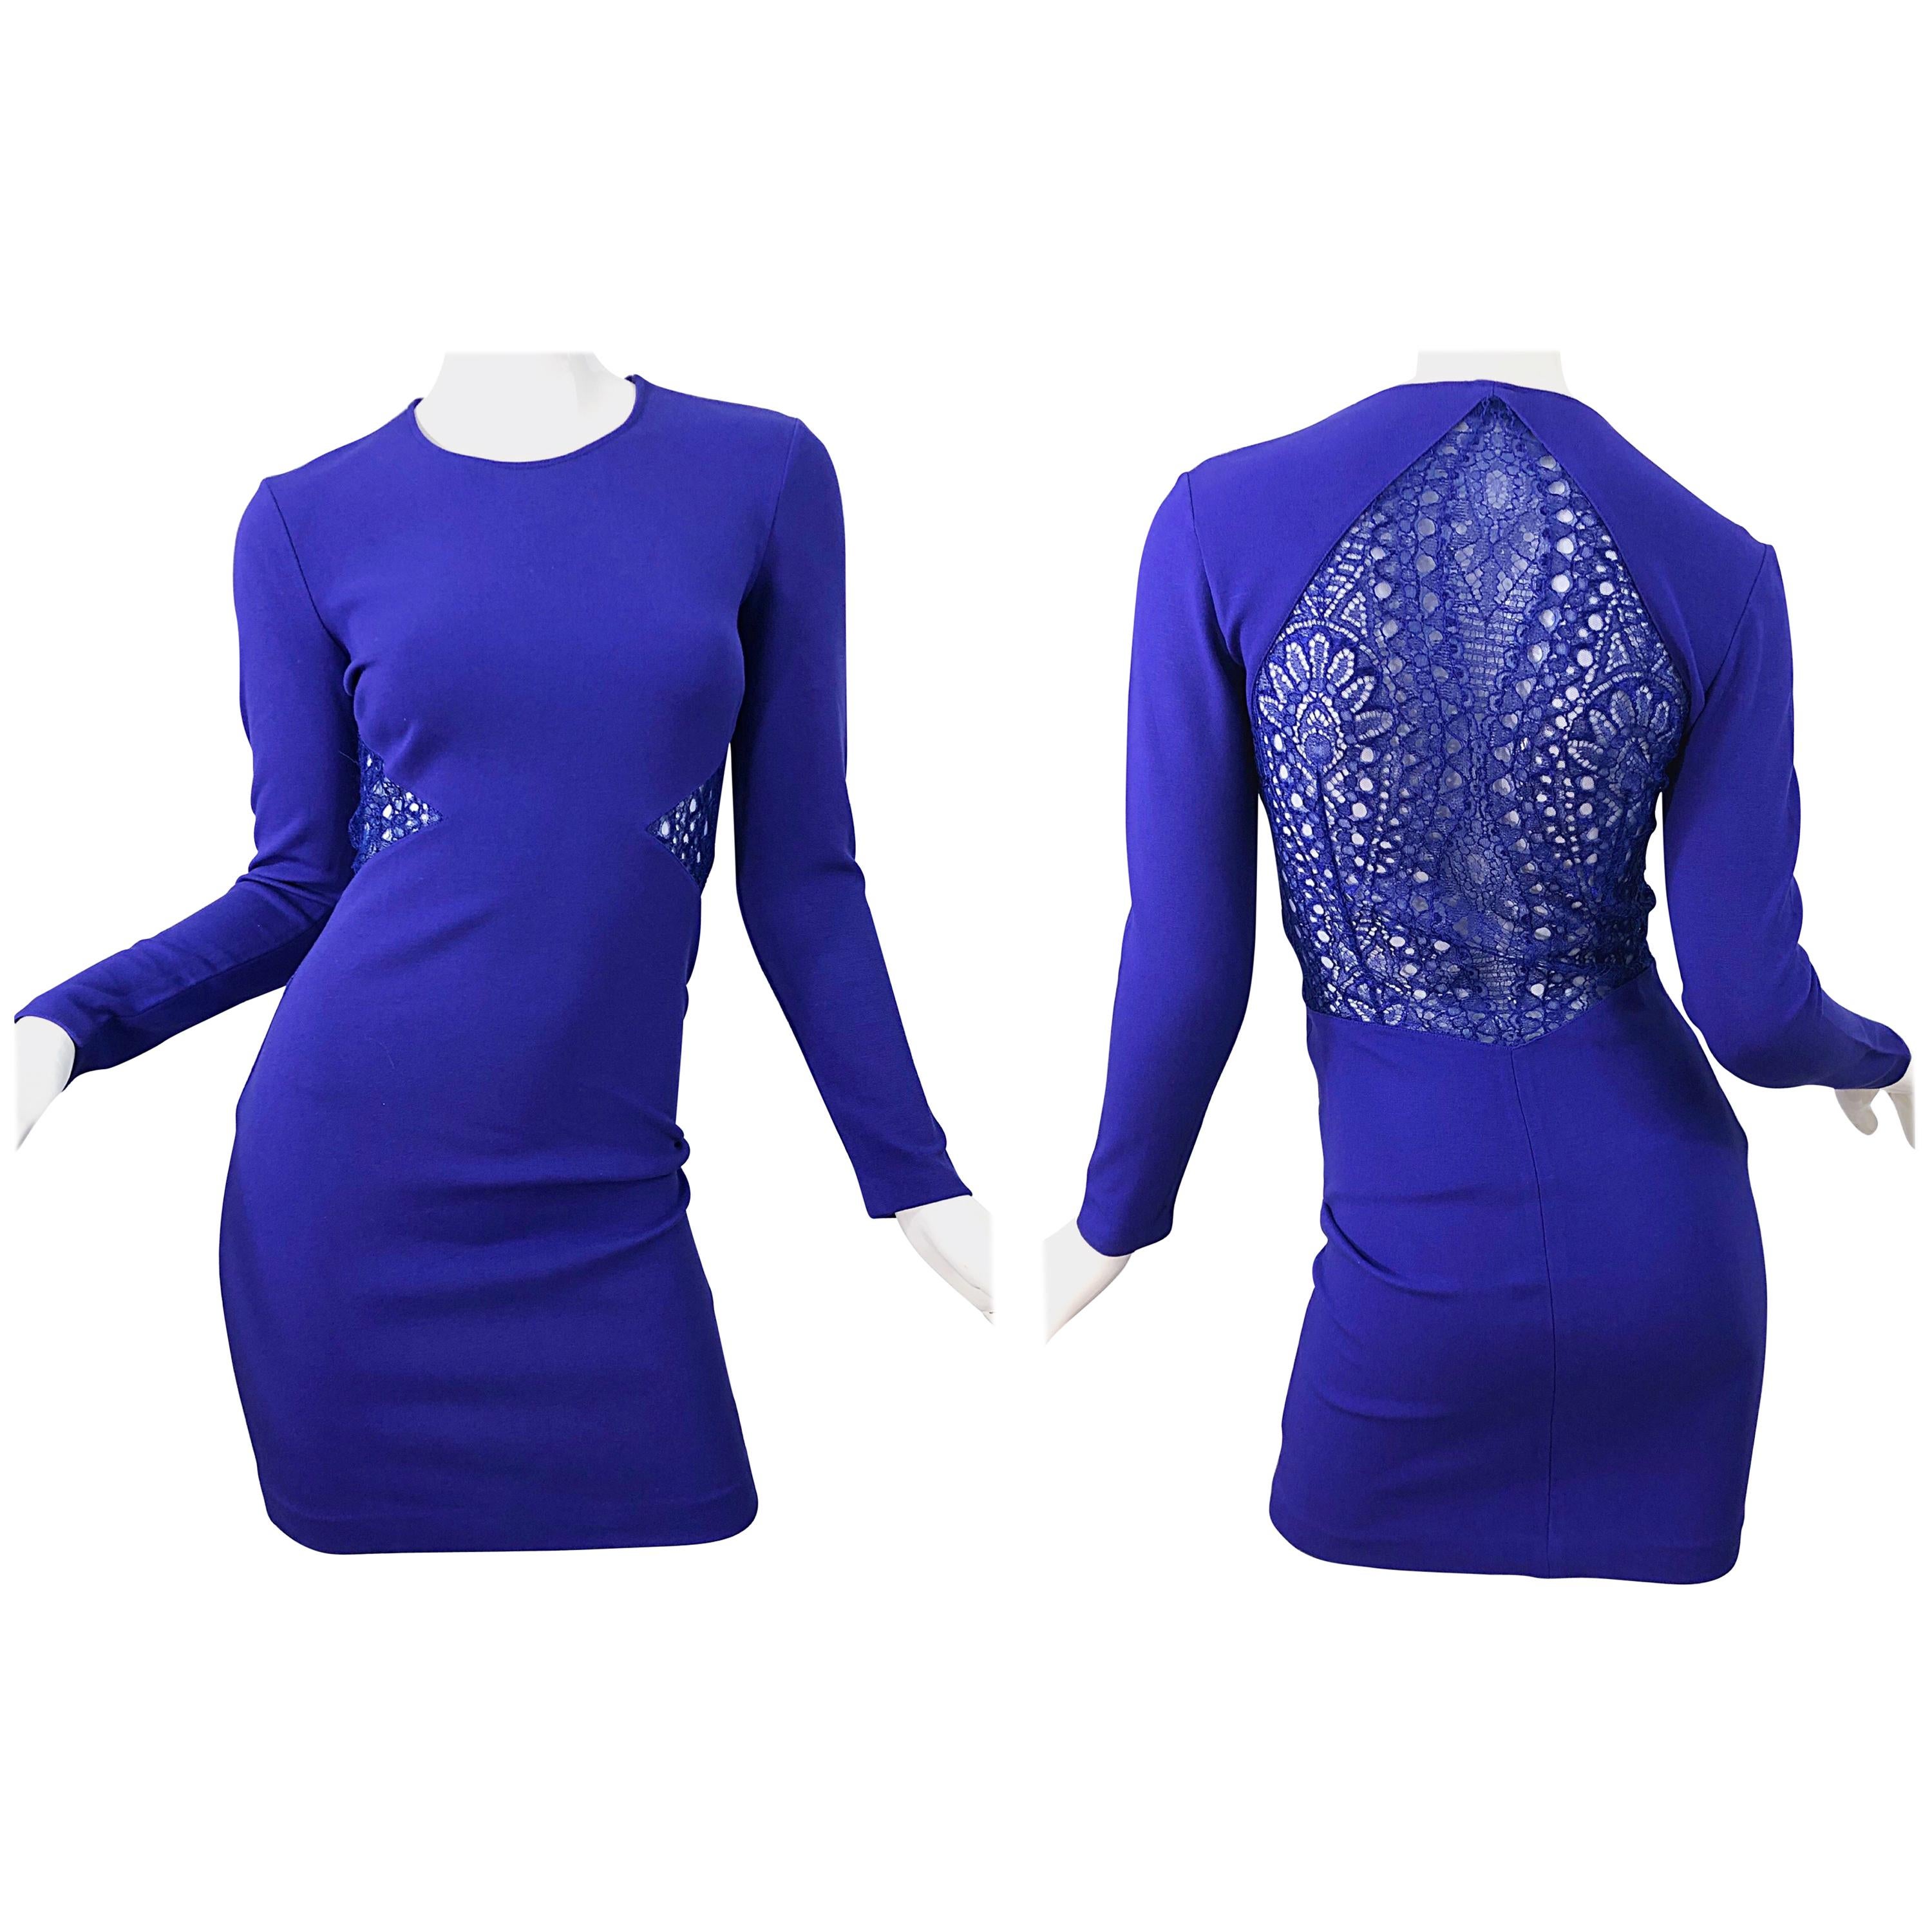 Emilio Pucci Fall 2012 Purple Rayon Lace Cut Out Long Sleeve Bodycon Dress For Sale